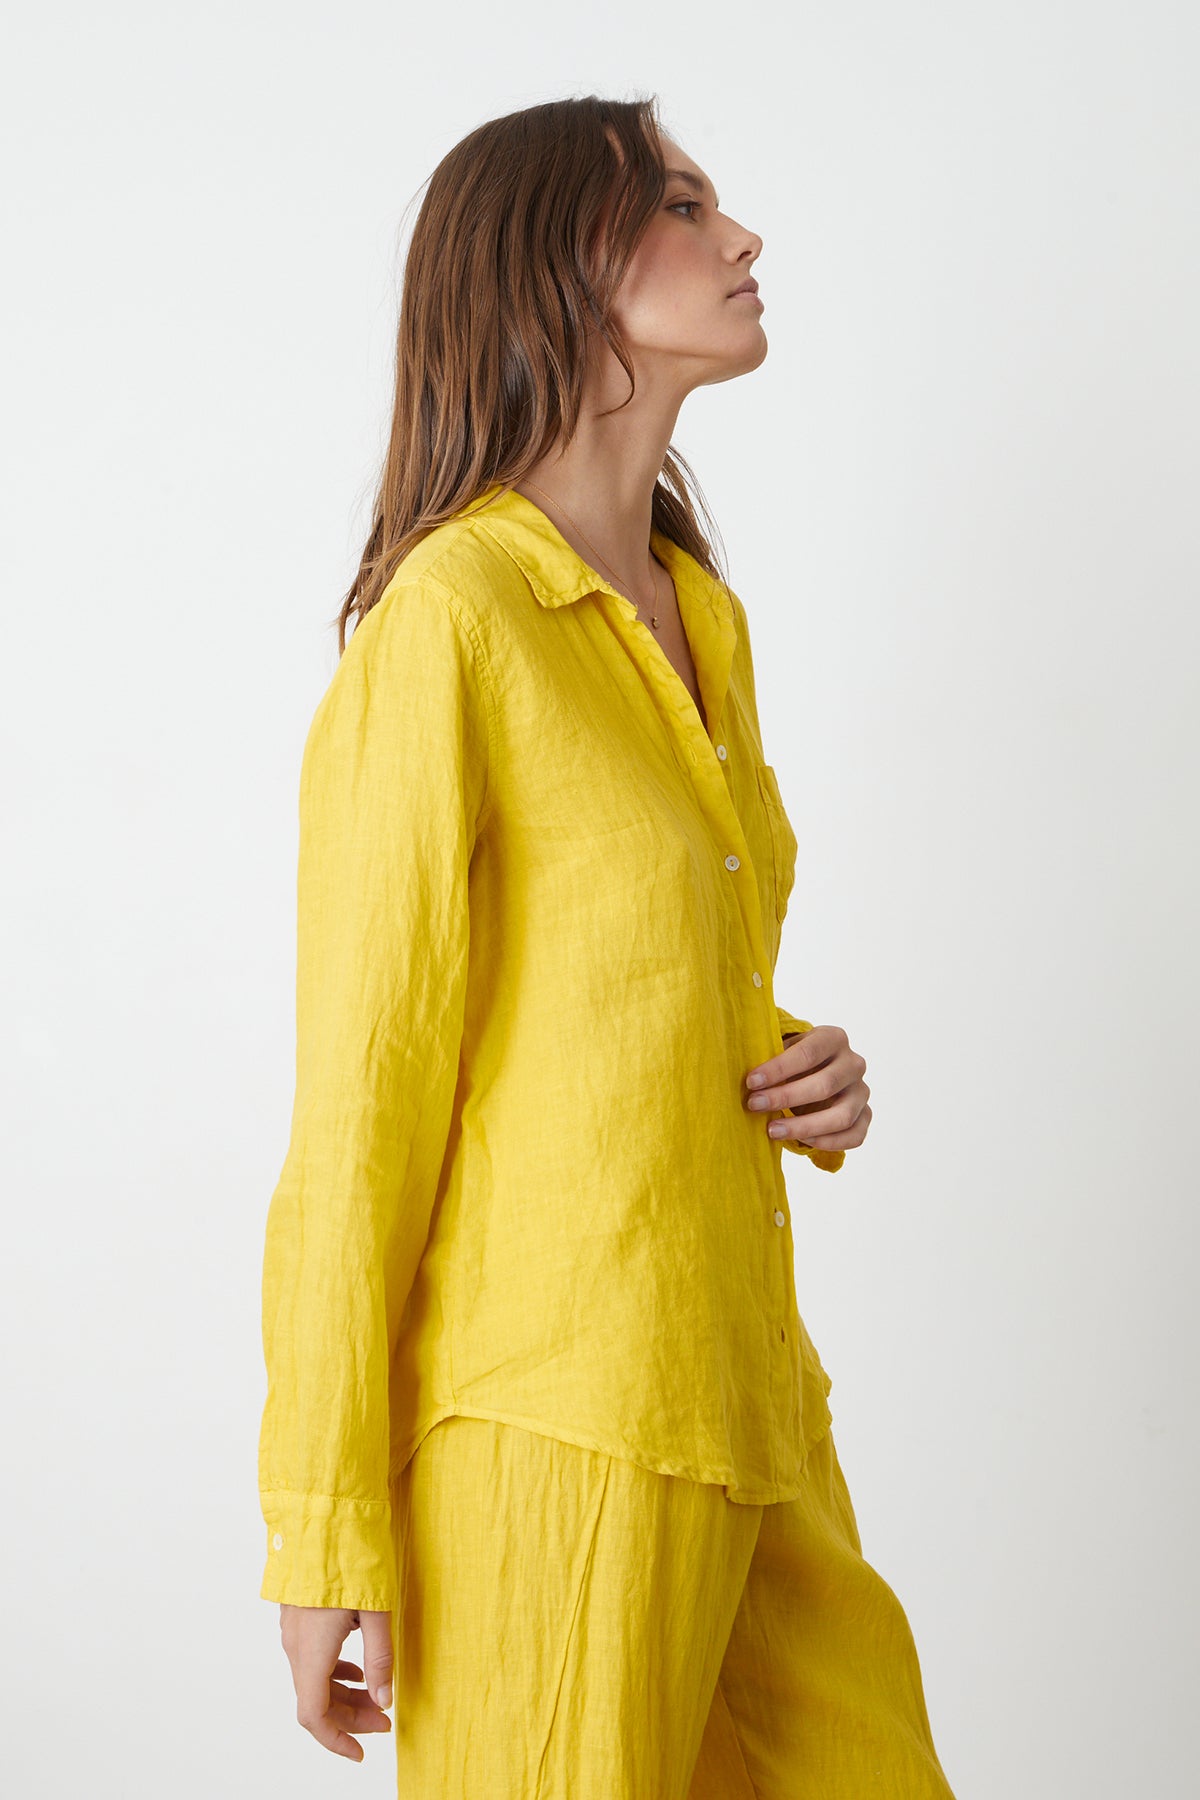   Natalia Button-Up Shirt in bright yellow sun colored linen with Lola pant side 